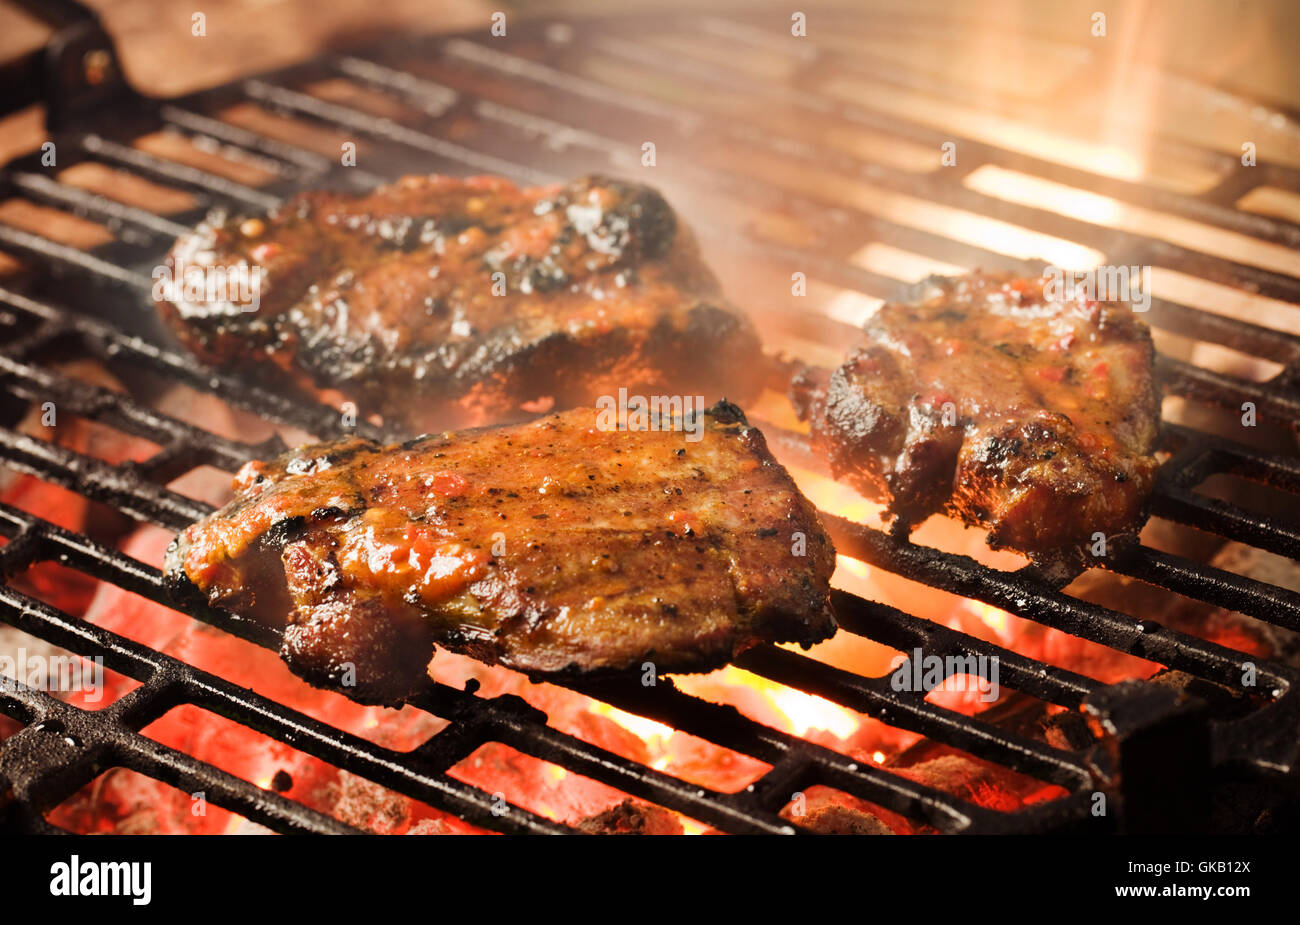 grill barbecue barbeque Stock Photo